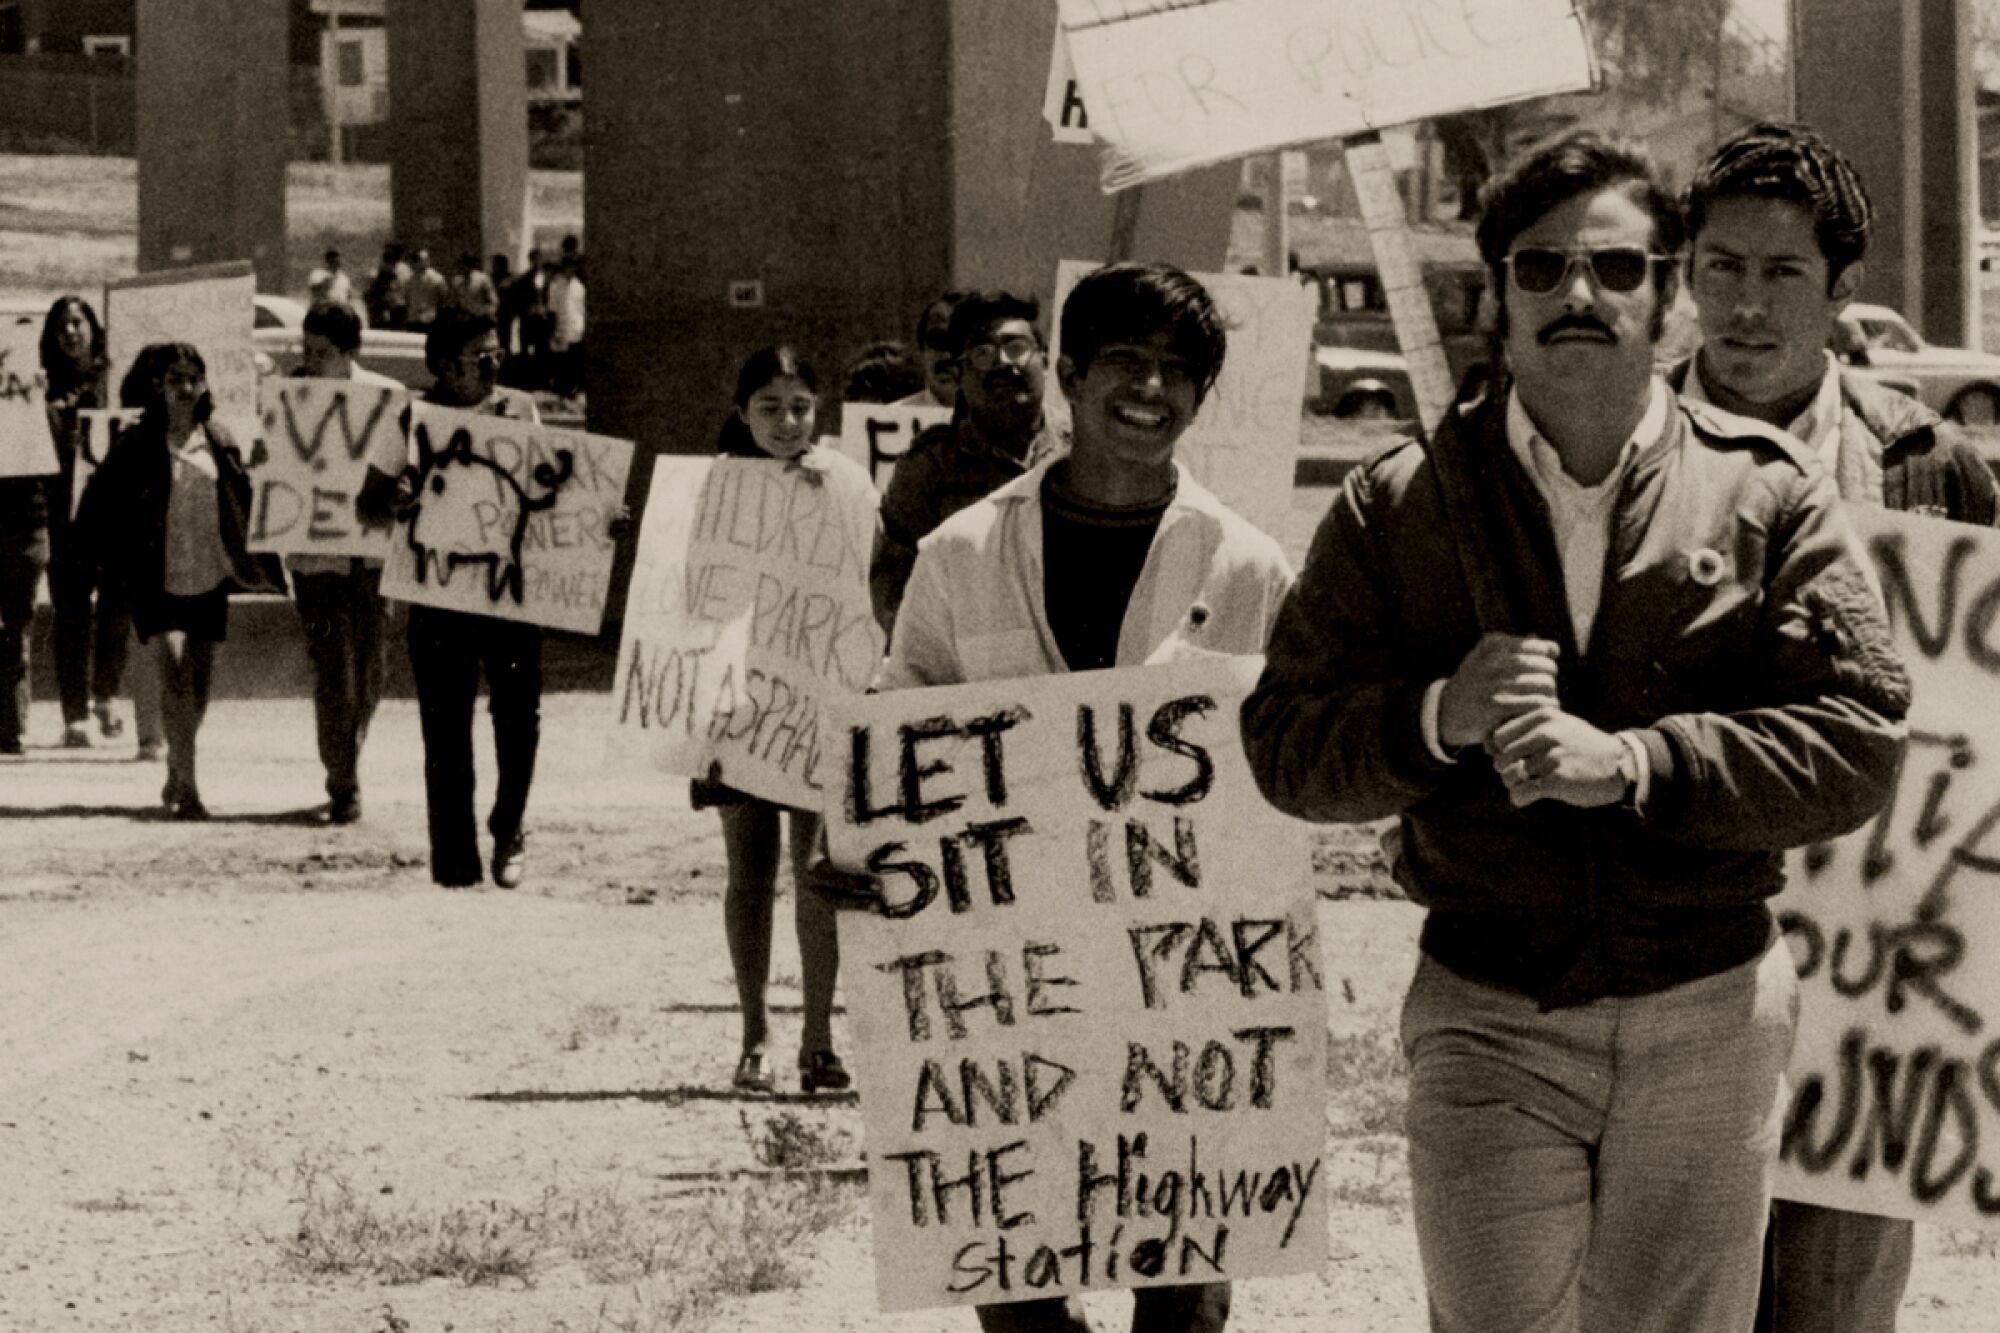 Black-and-white photo of protesters carrying signs with messages like "Let us sit in the park and not the highway station."